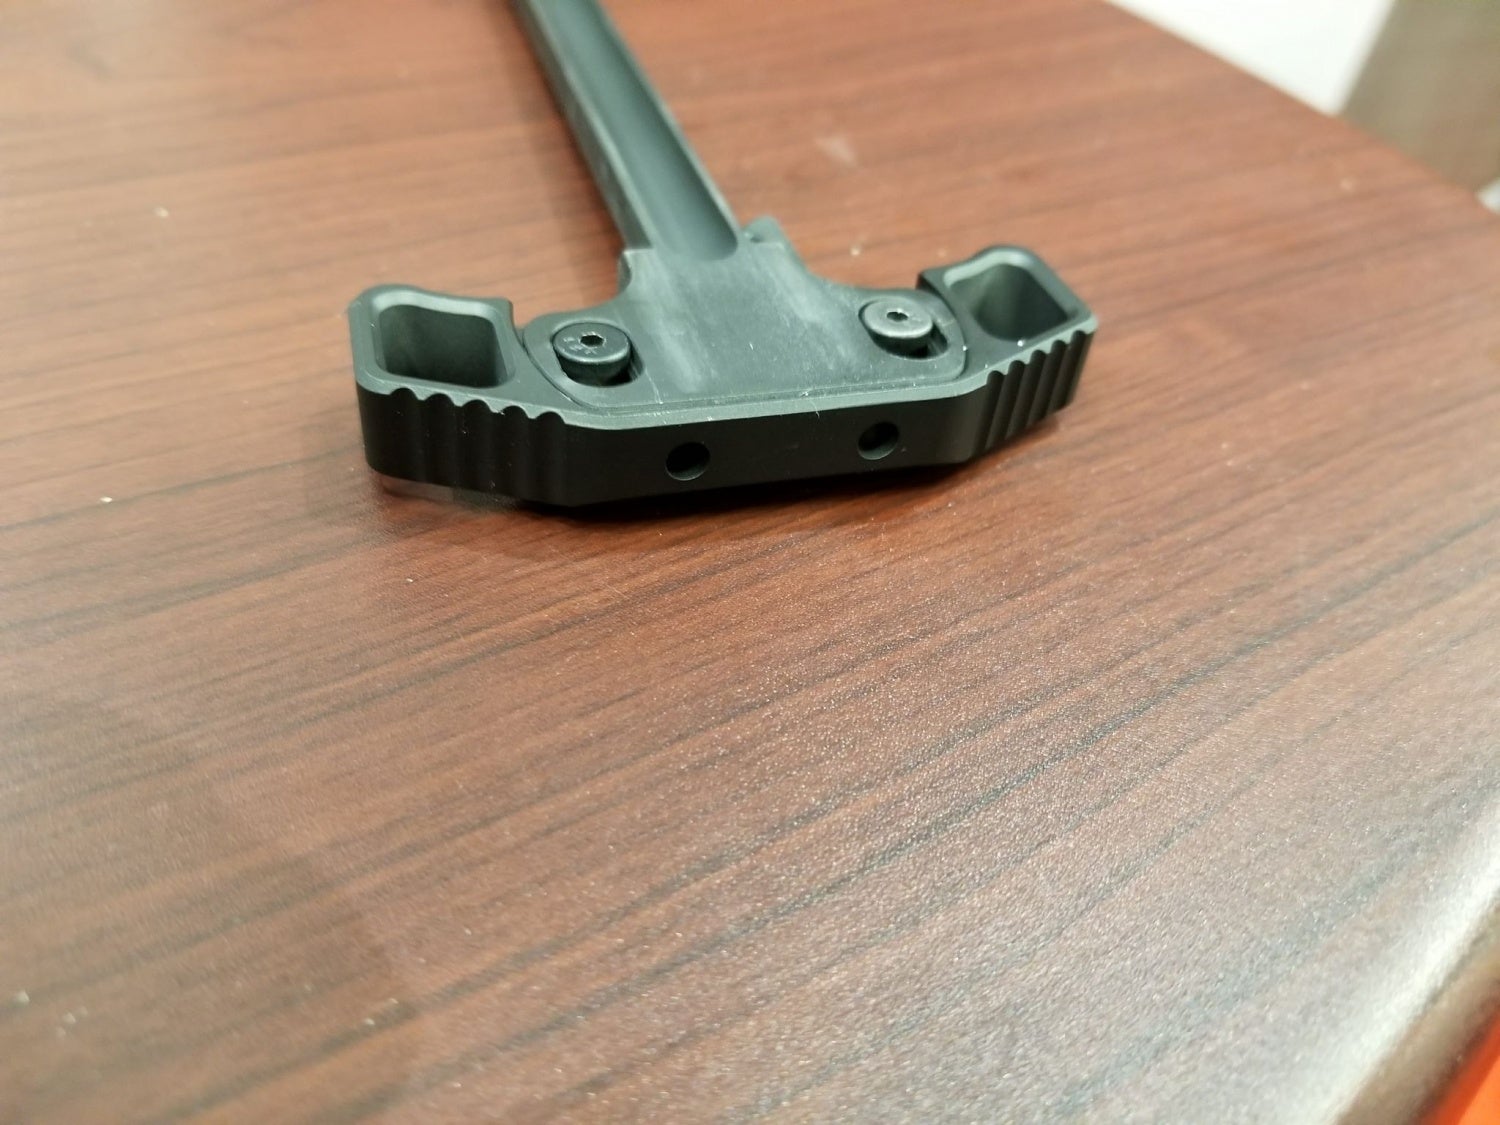 The head of the charging handle is secured by 2 pivoting screws.